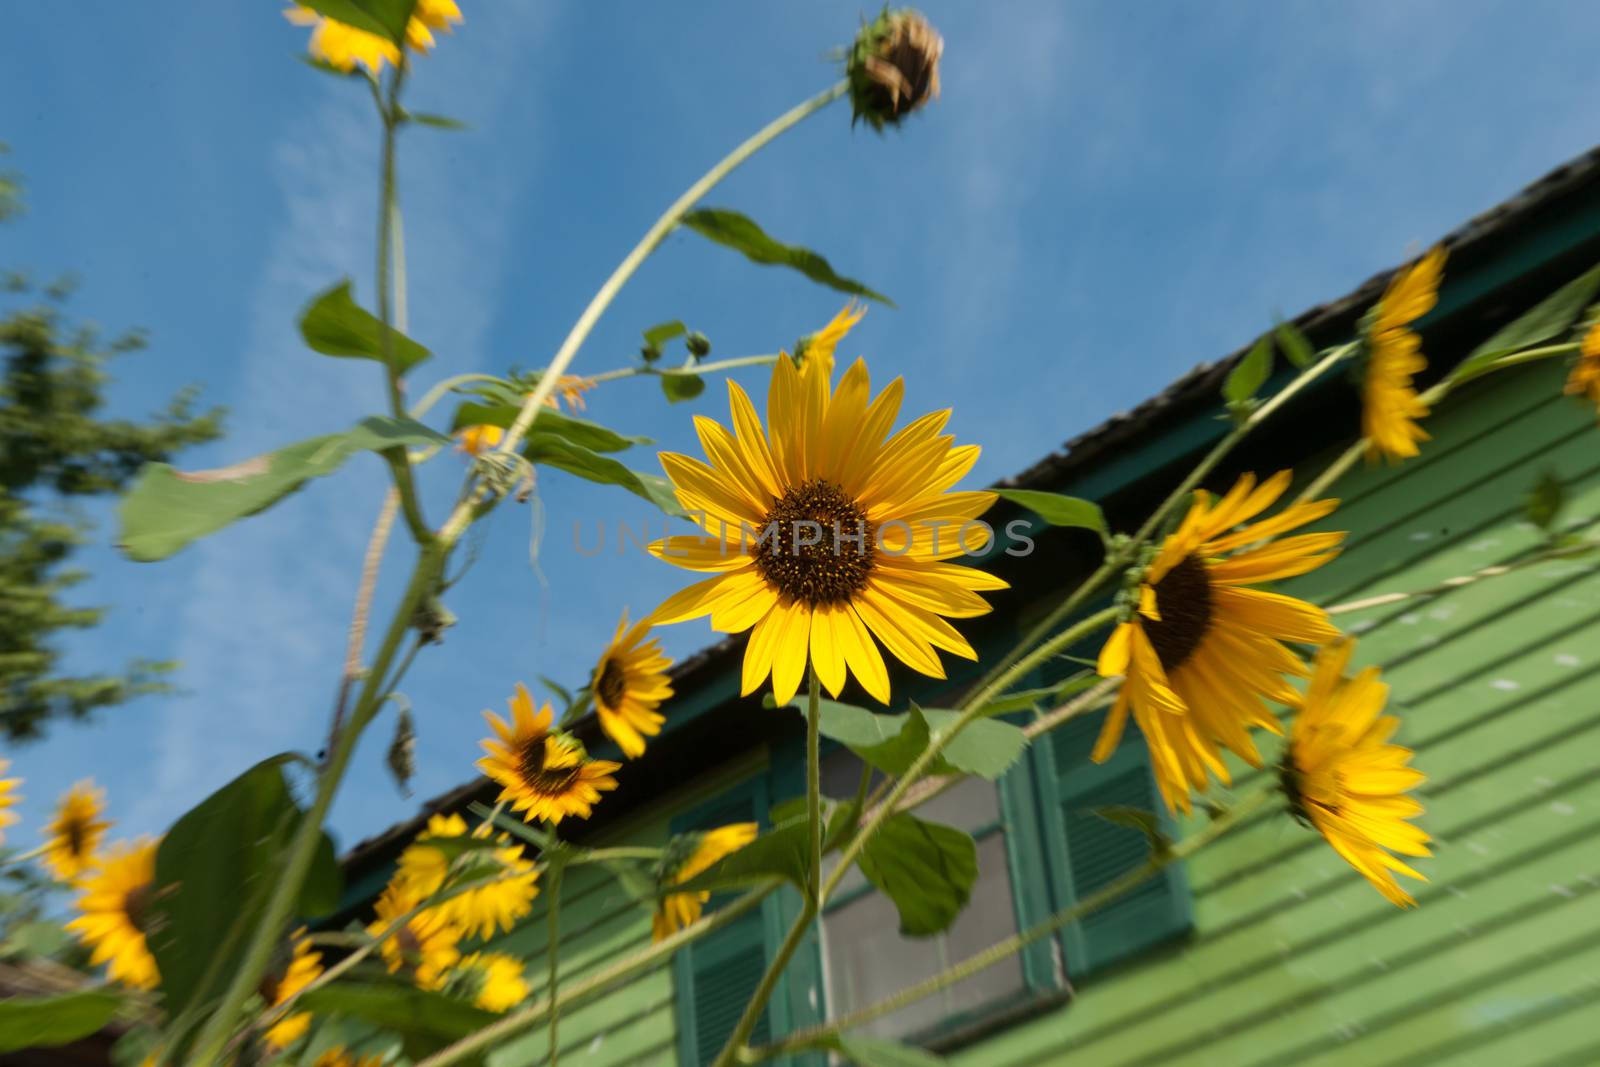 Bright yellow sunflower against bokeh background of other sunflowers and green exterior building.